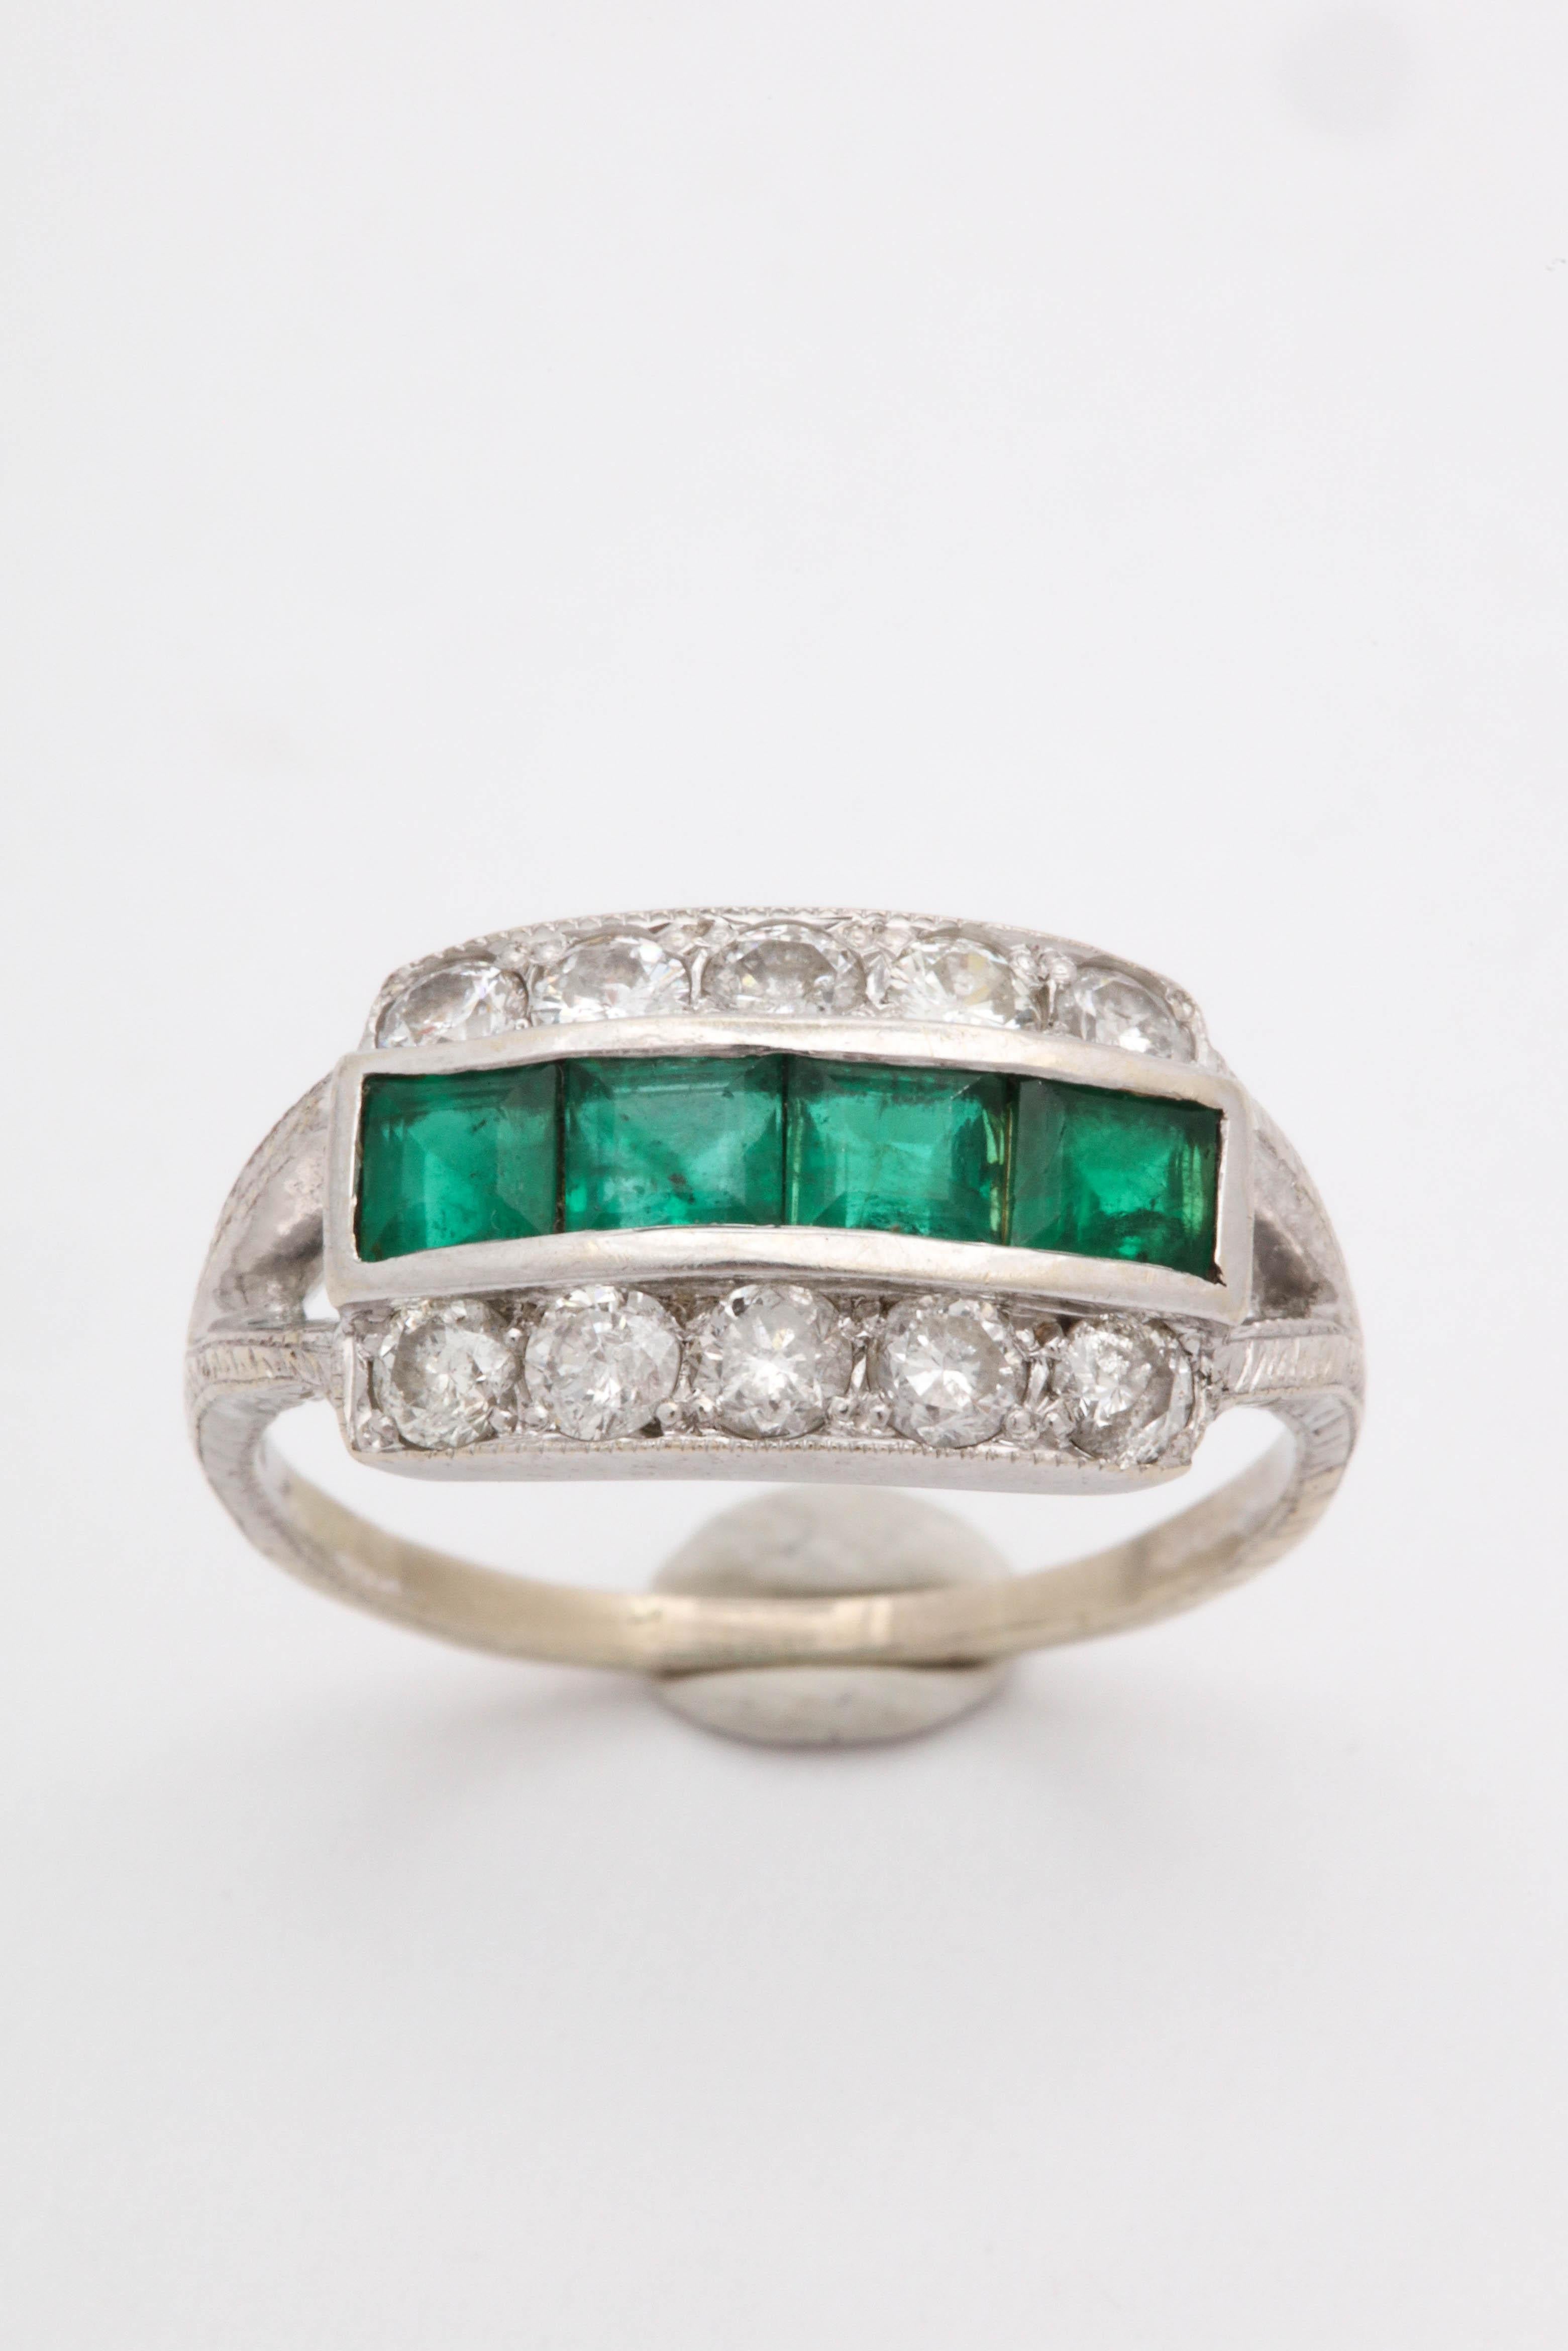 1930s Emerald Cut Emeralds with Diamonds Band Style White Gold Ring 3